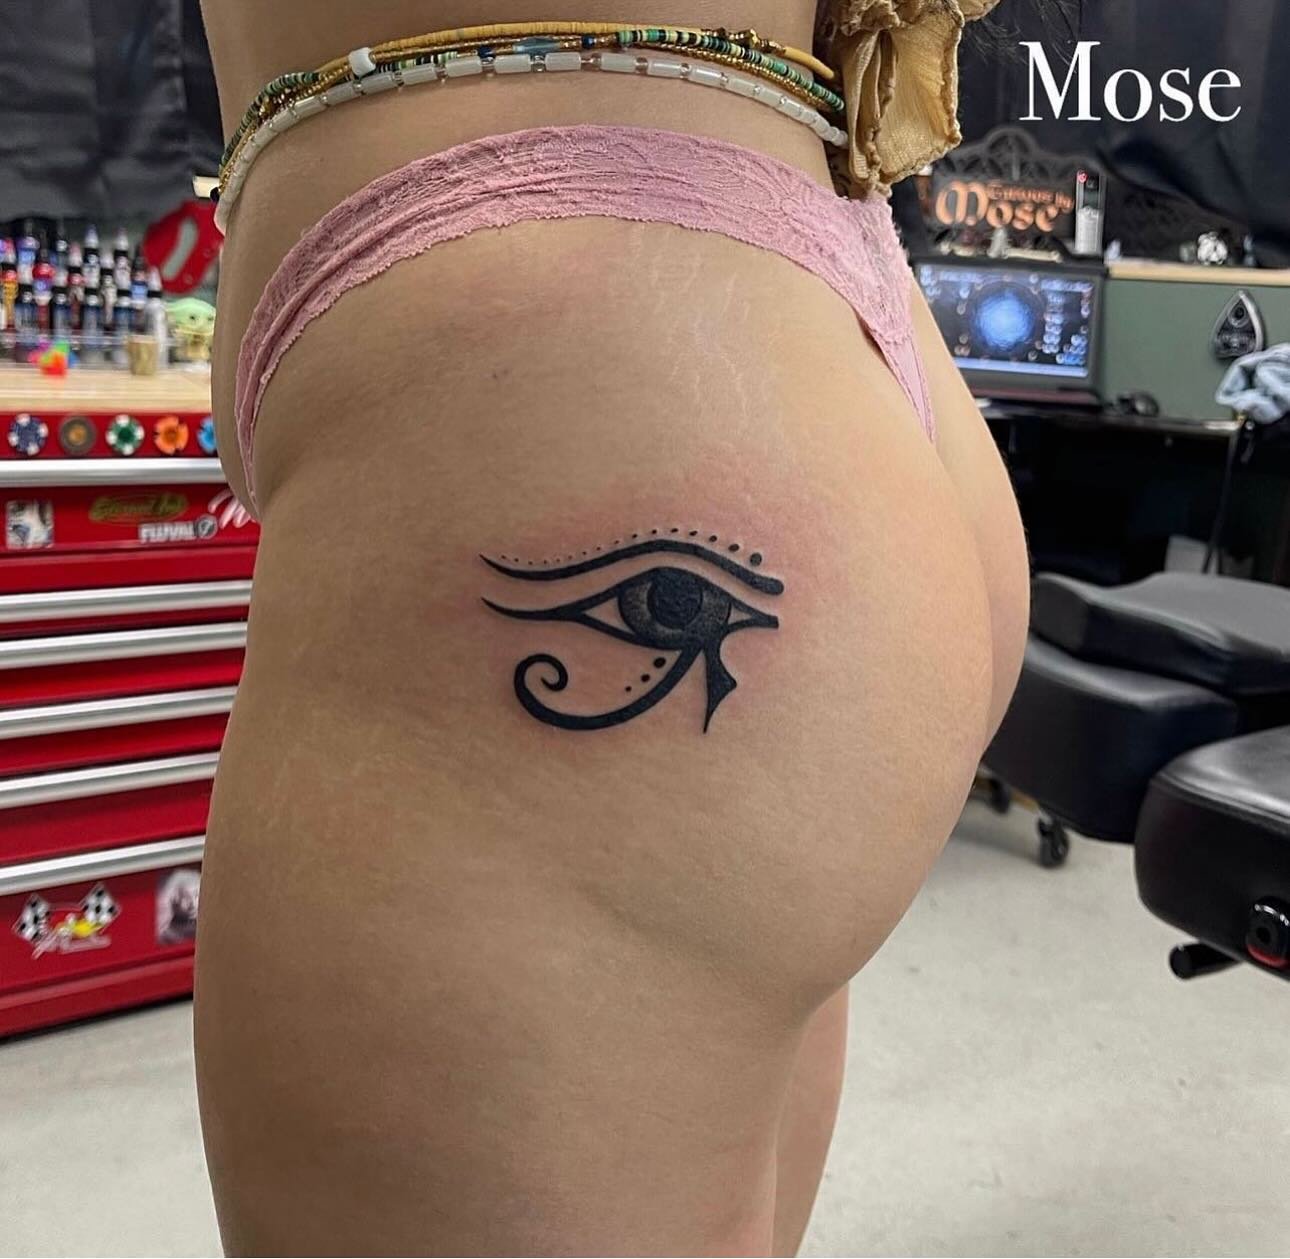 Happy humpday! I see you looking, come get a tattoo! #tattoo #tattooartist #lasvegas #lasvegastattooartist #criticaltattoosupply #dynamiccolor #girlswithtattoos #tattooart #tattoos #tattoolife #tattooedgirls #guyswithtattoos #inked #tattooed #bodyart